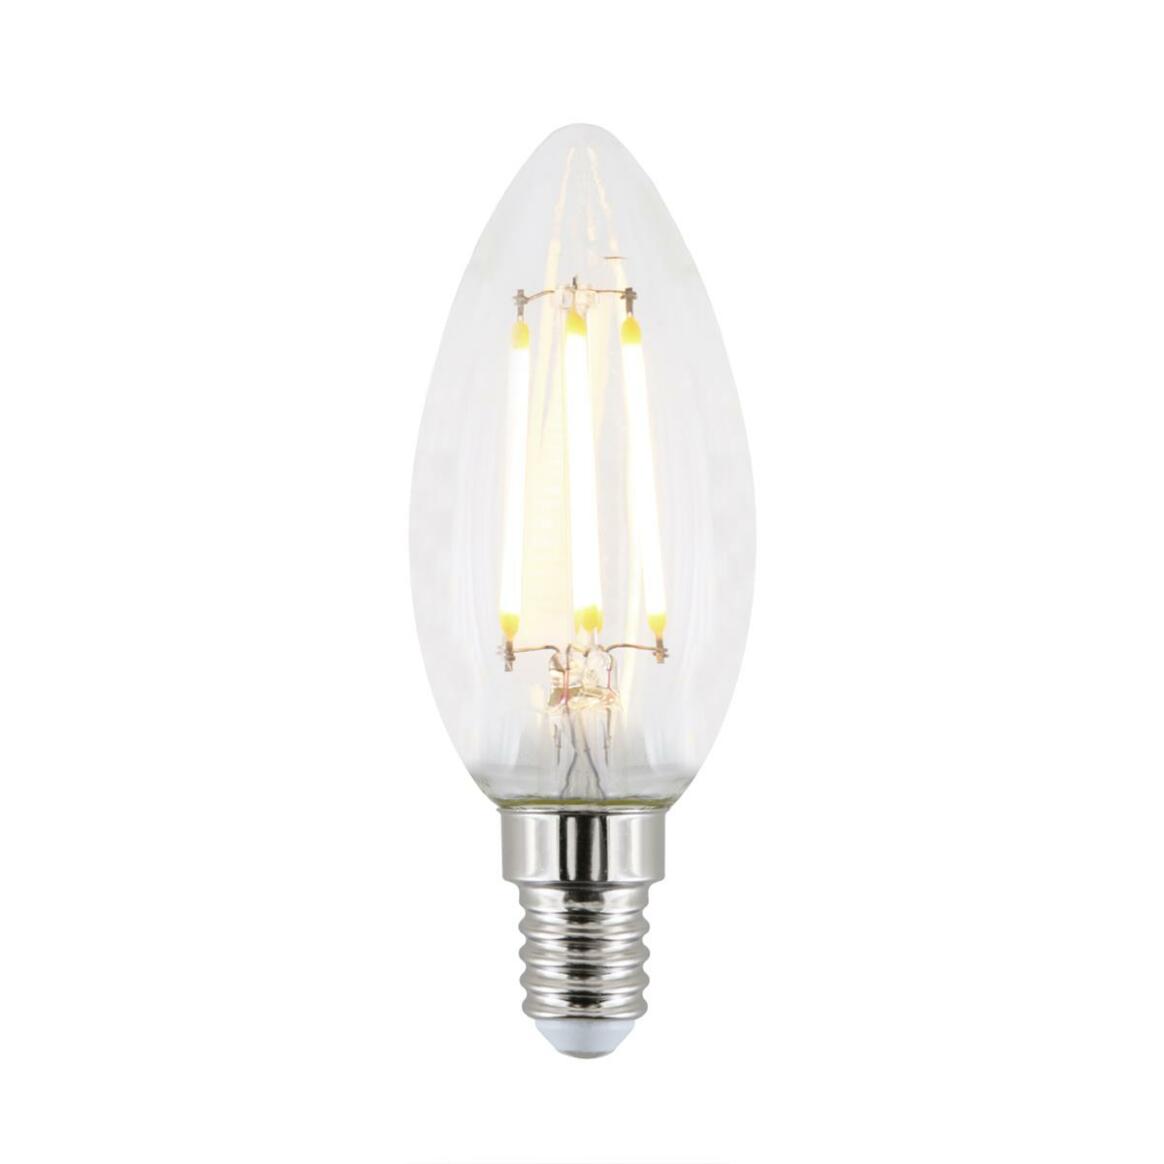 E14 LED Candle Light Bulb Dimmable 4.8W 2700k 470lm 9.7cm main product image